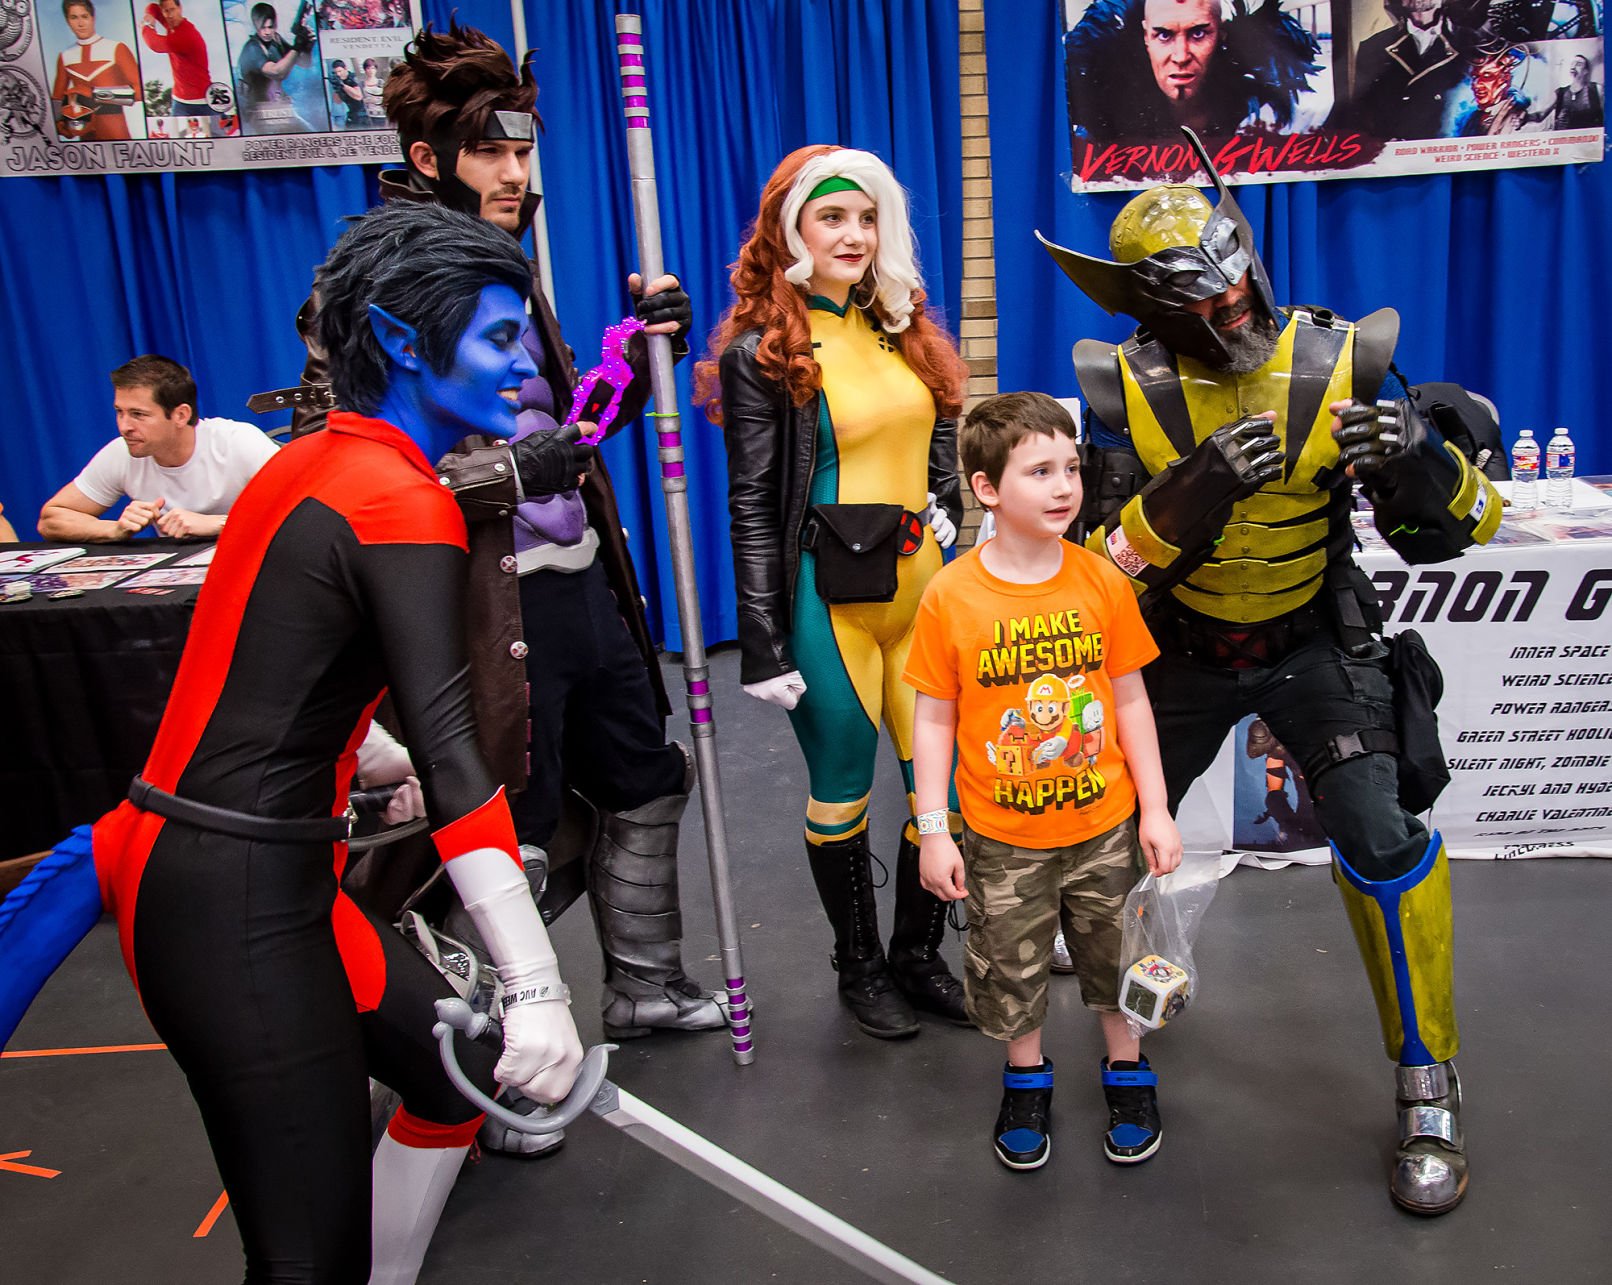 The 2nd Annual Ba-Con Anime Convention returns to Pasadena this weekend